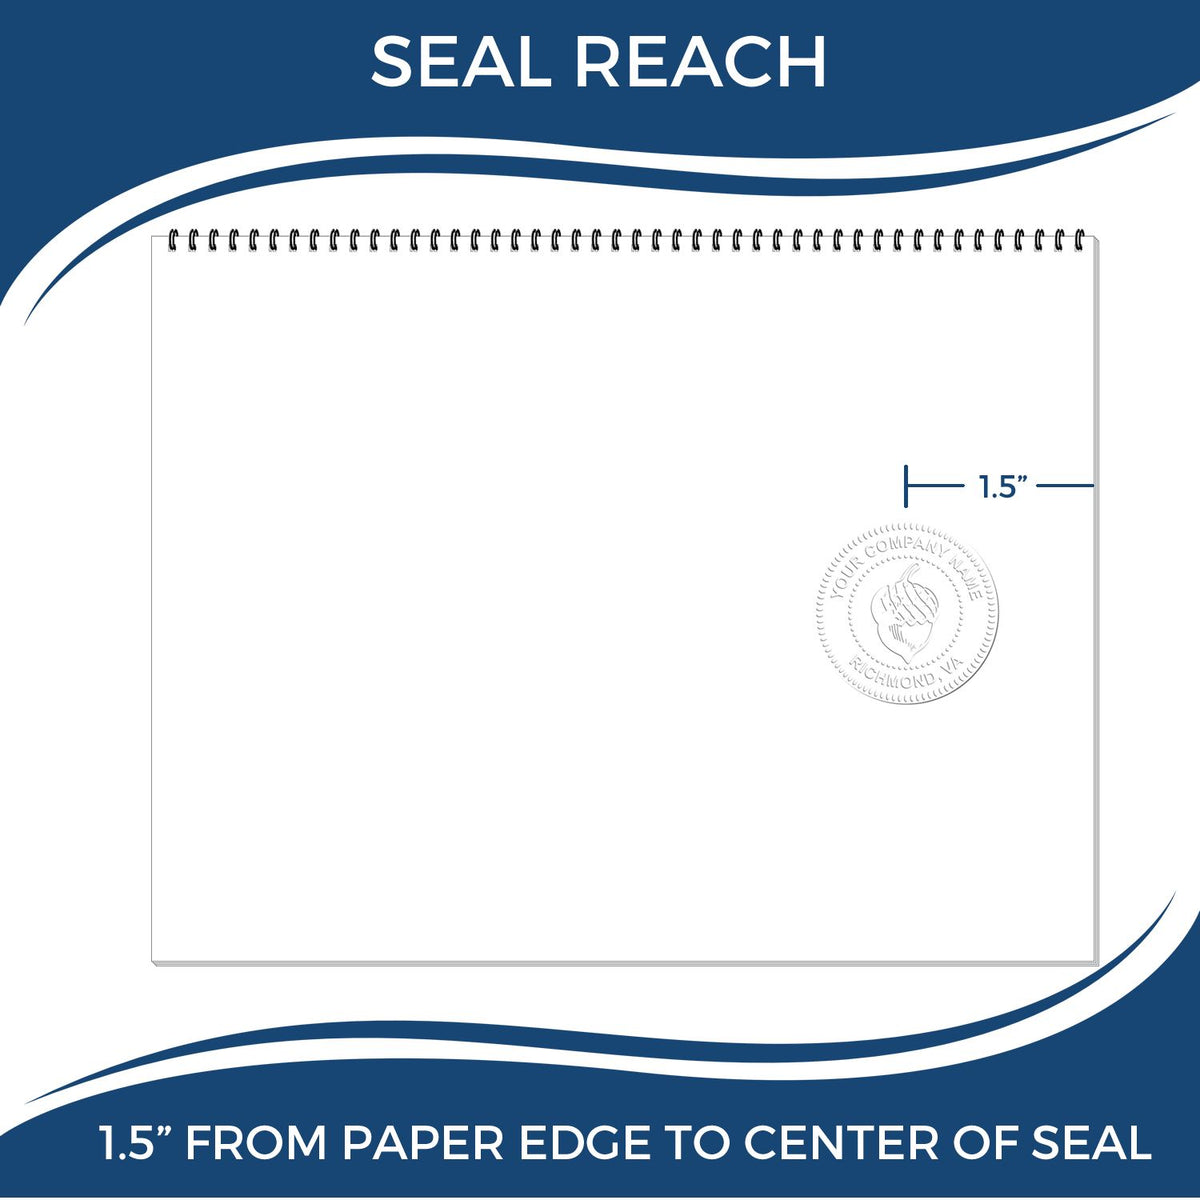 An infographic showing the seal reach which is represented by a ruler and a miniature seal image of the Hybrid Indiana Architect Seal